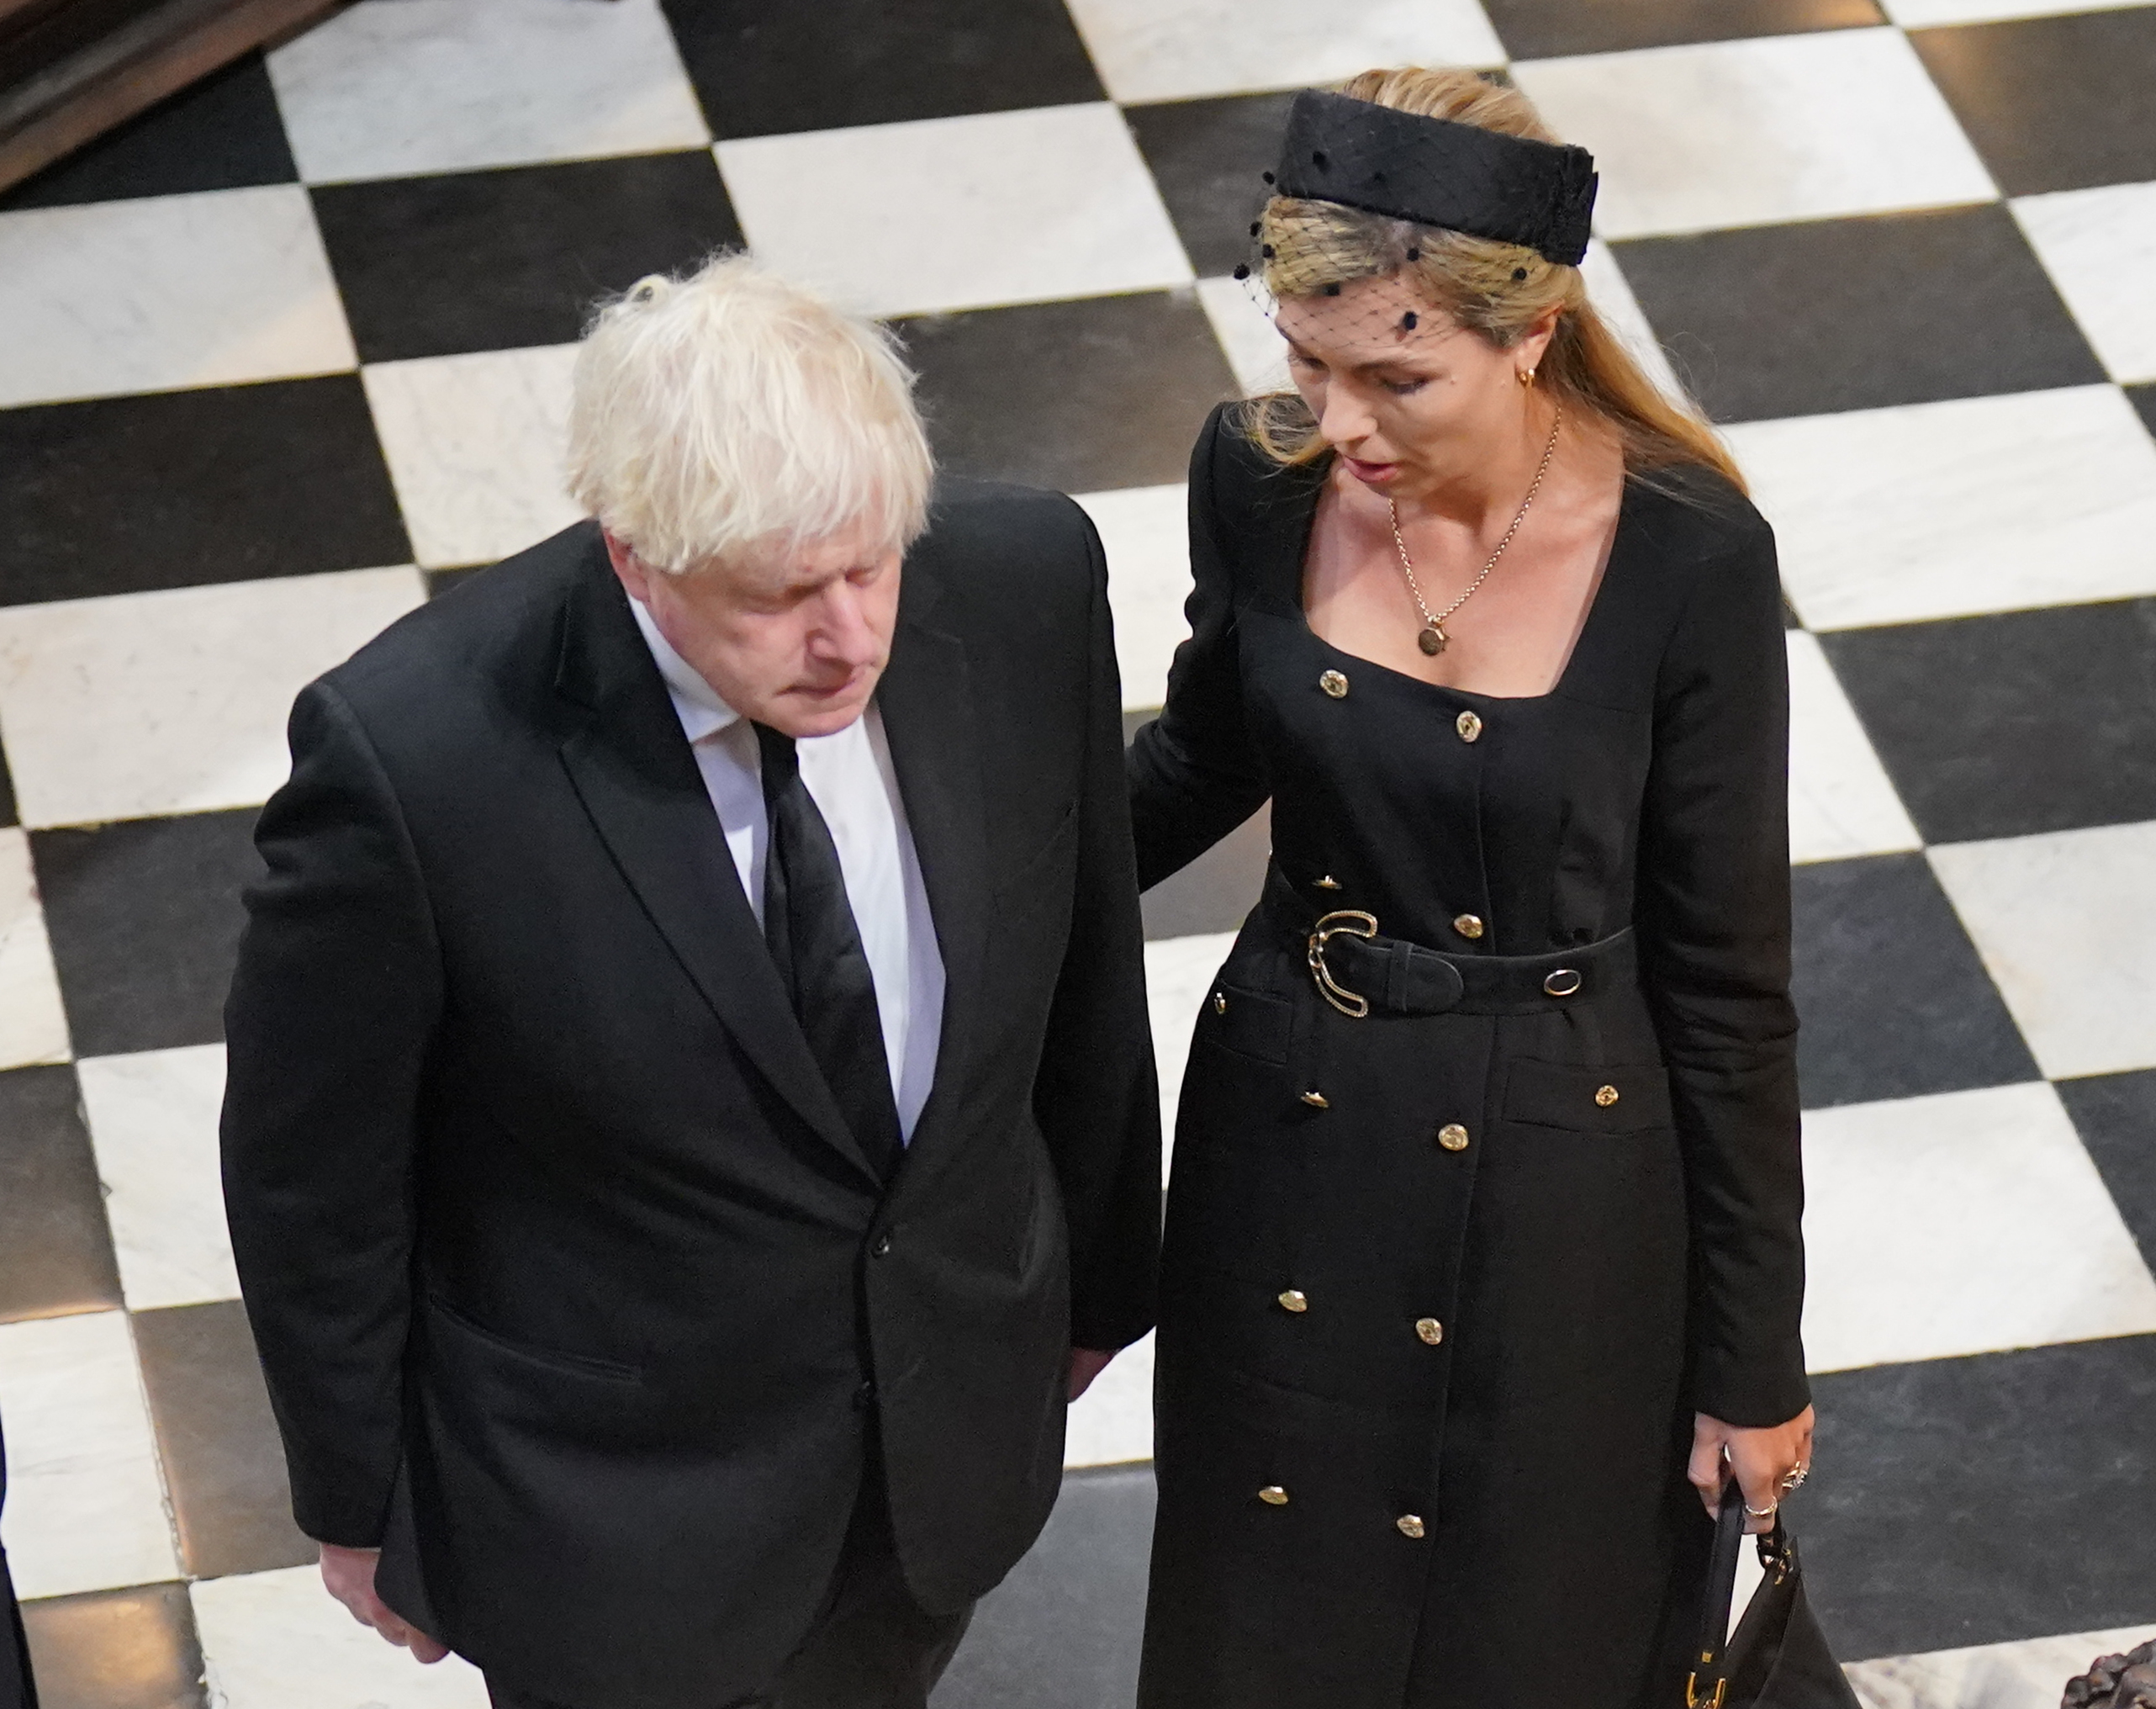 Former prime minister Boris Johnson and his wife Carrie Johnson 